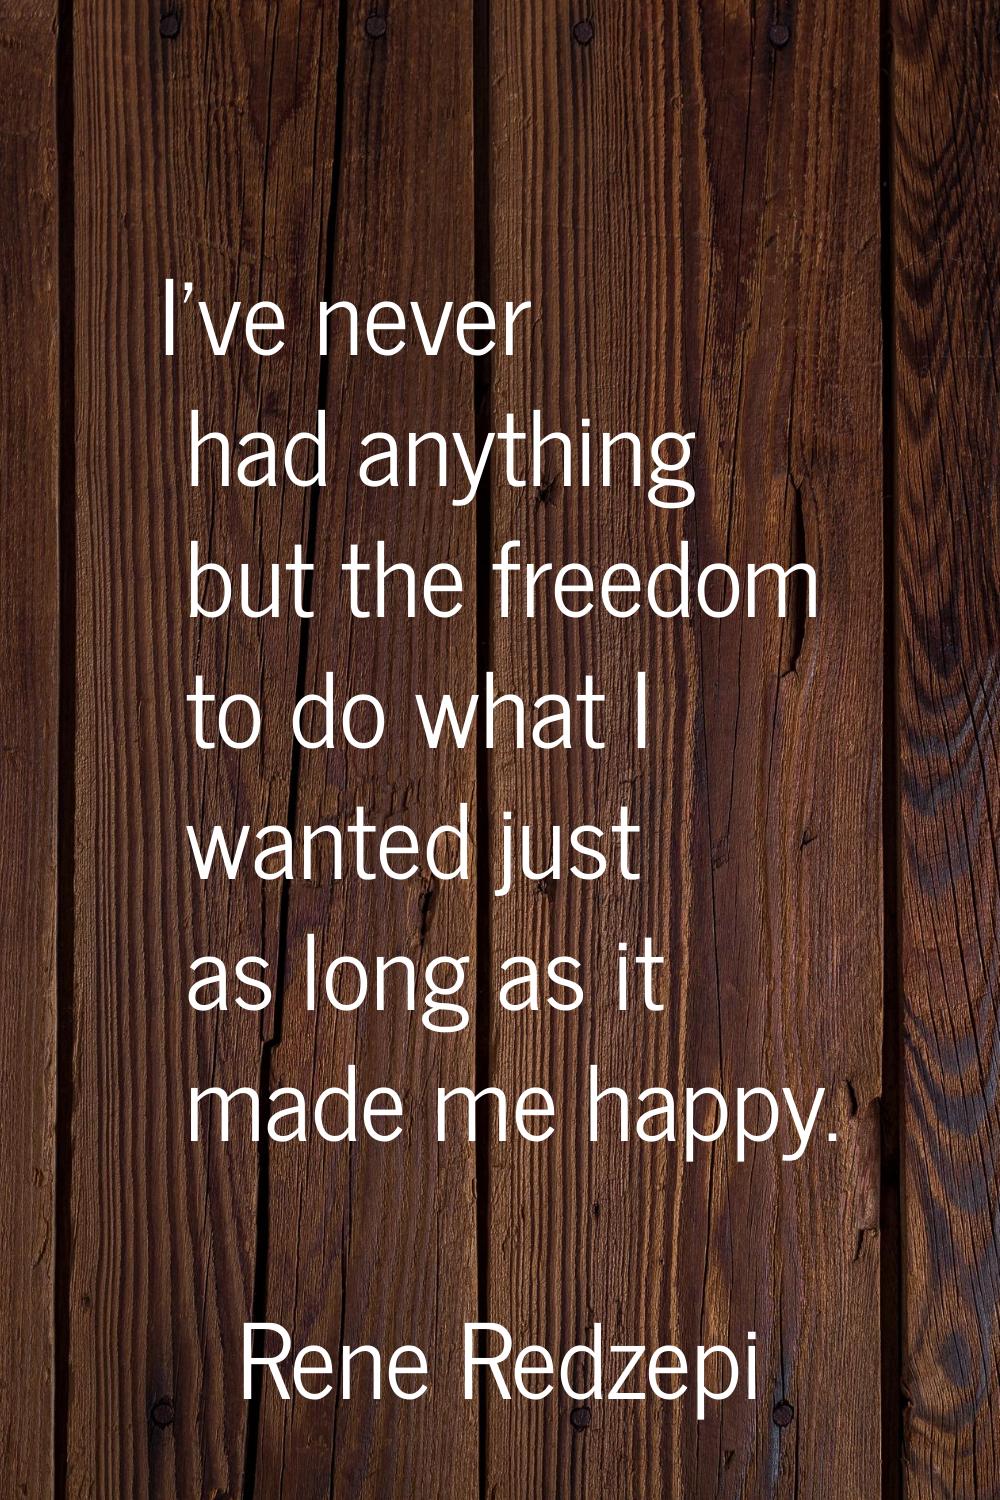 I've never had anything but the freedom to do what I wanted just as long as it made me happy.